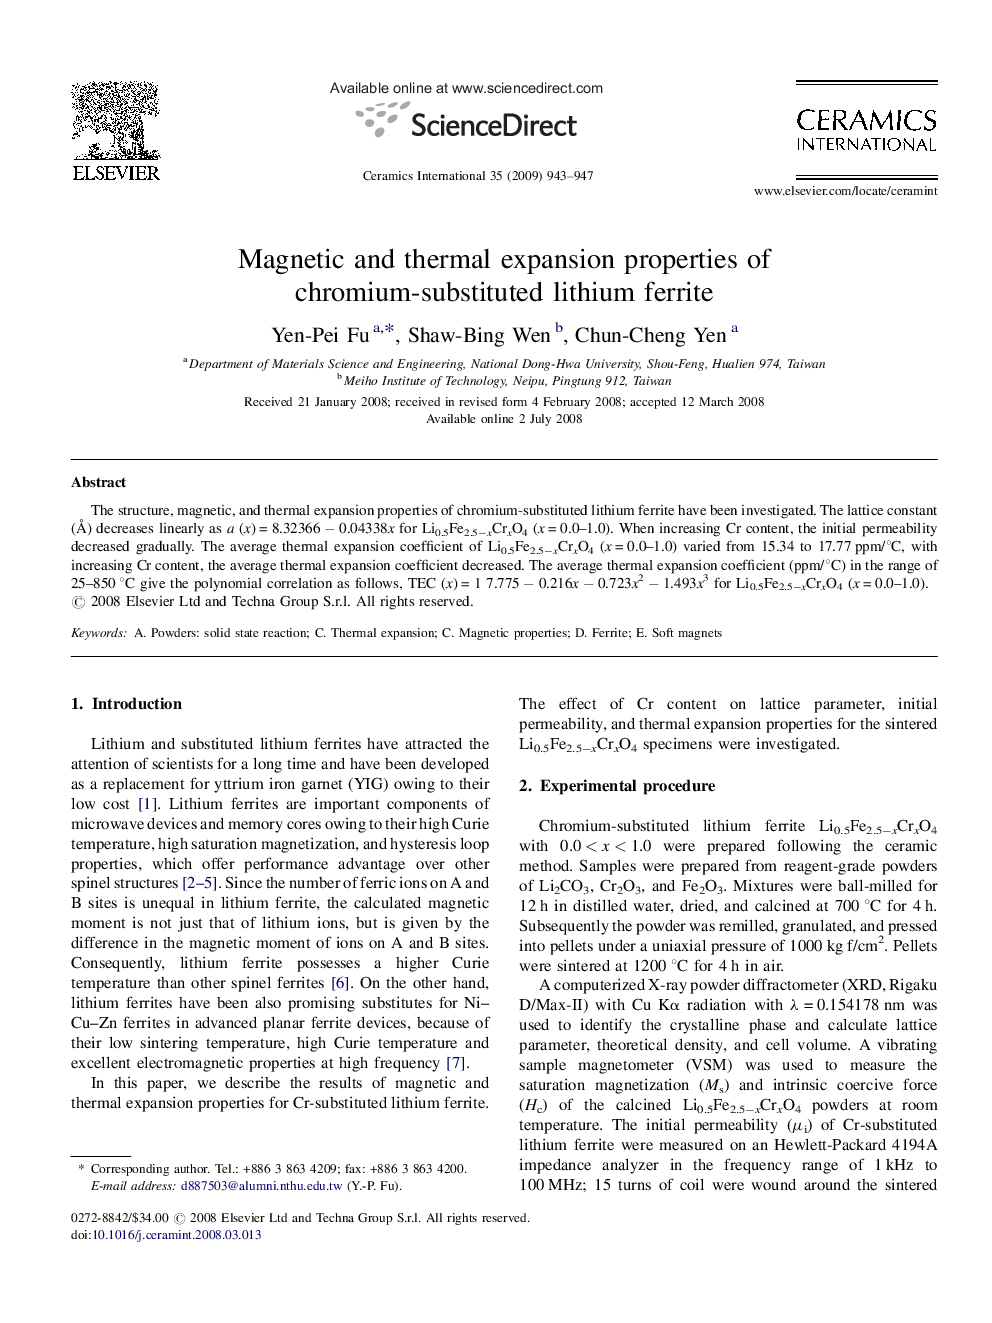 Magnetic and thermal expansion properties of chromium-substituted lithium ferrite